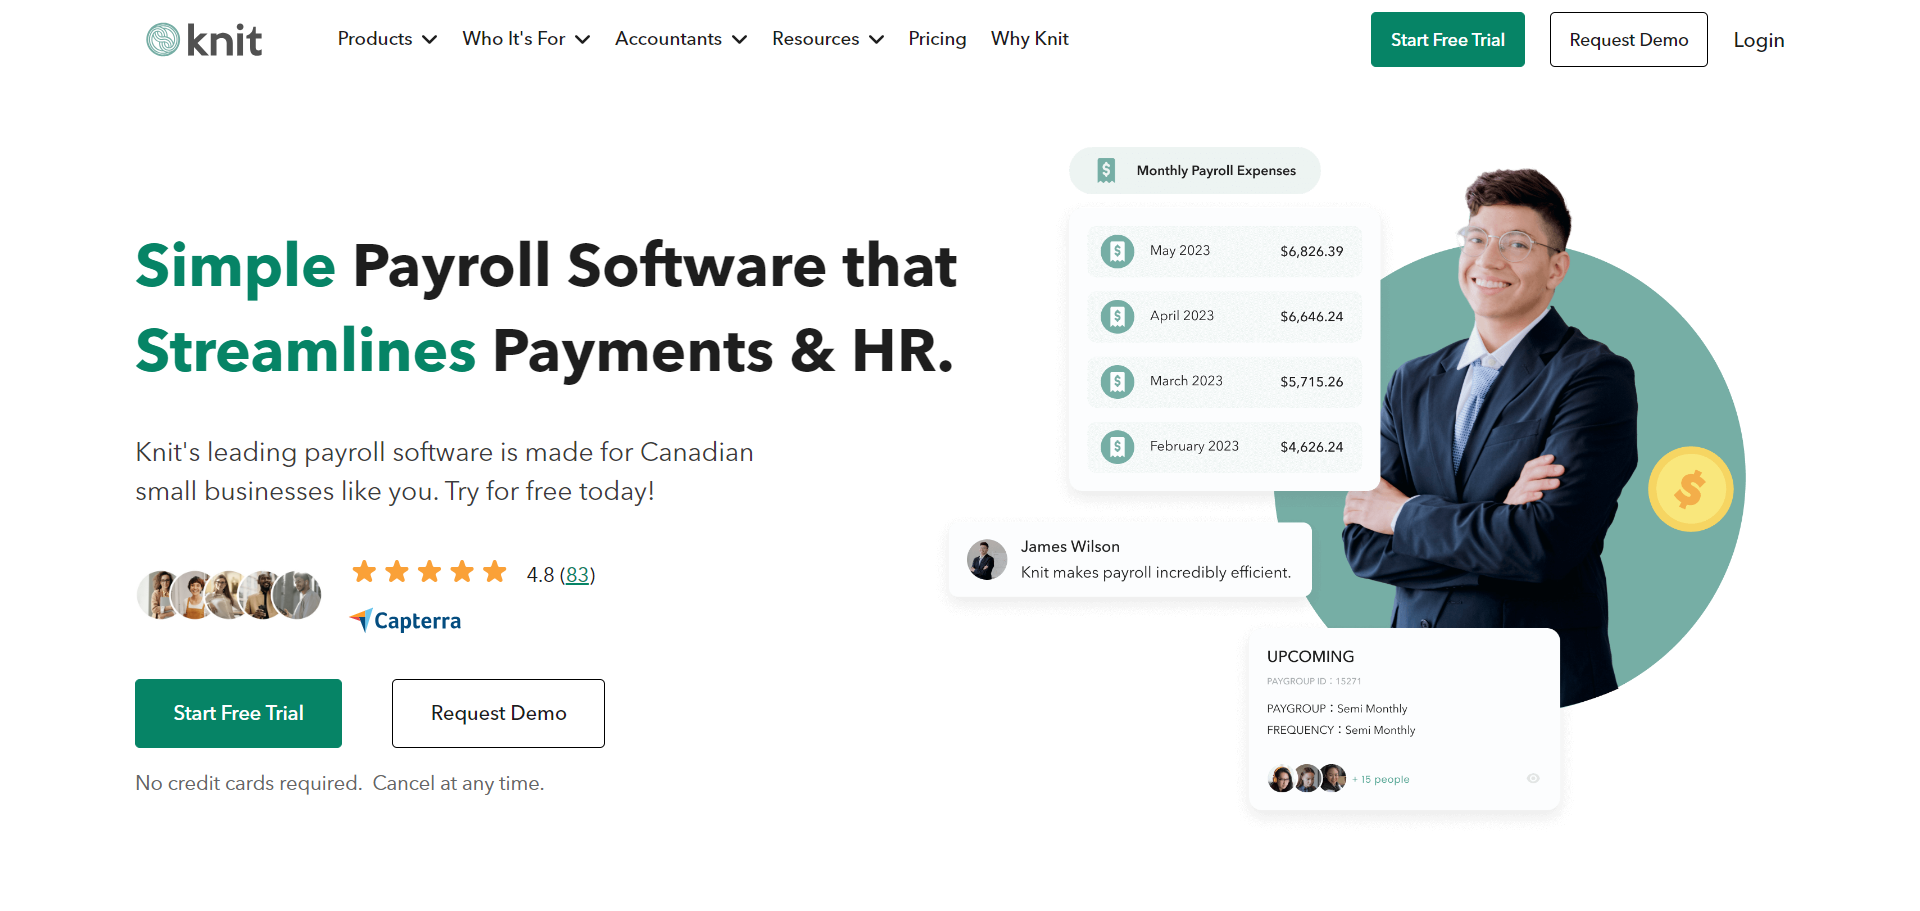 Homepage of Knit website mentioning 'Simple Payroll Software that Streamlines Payment & HR'